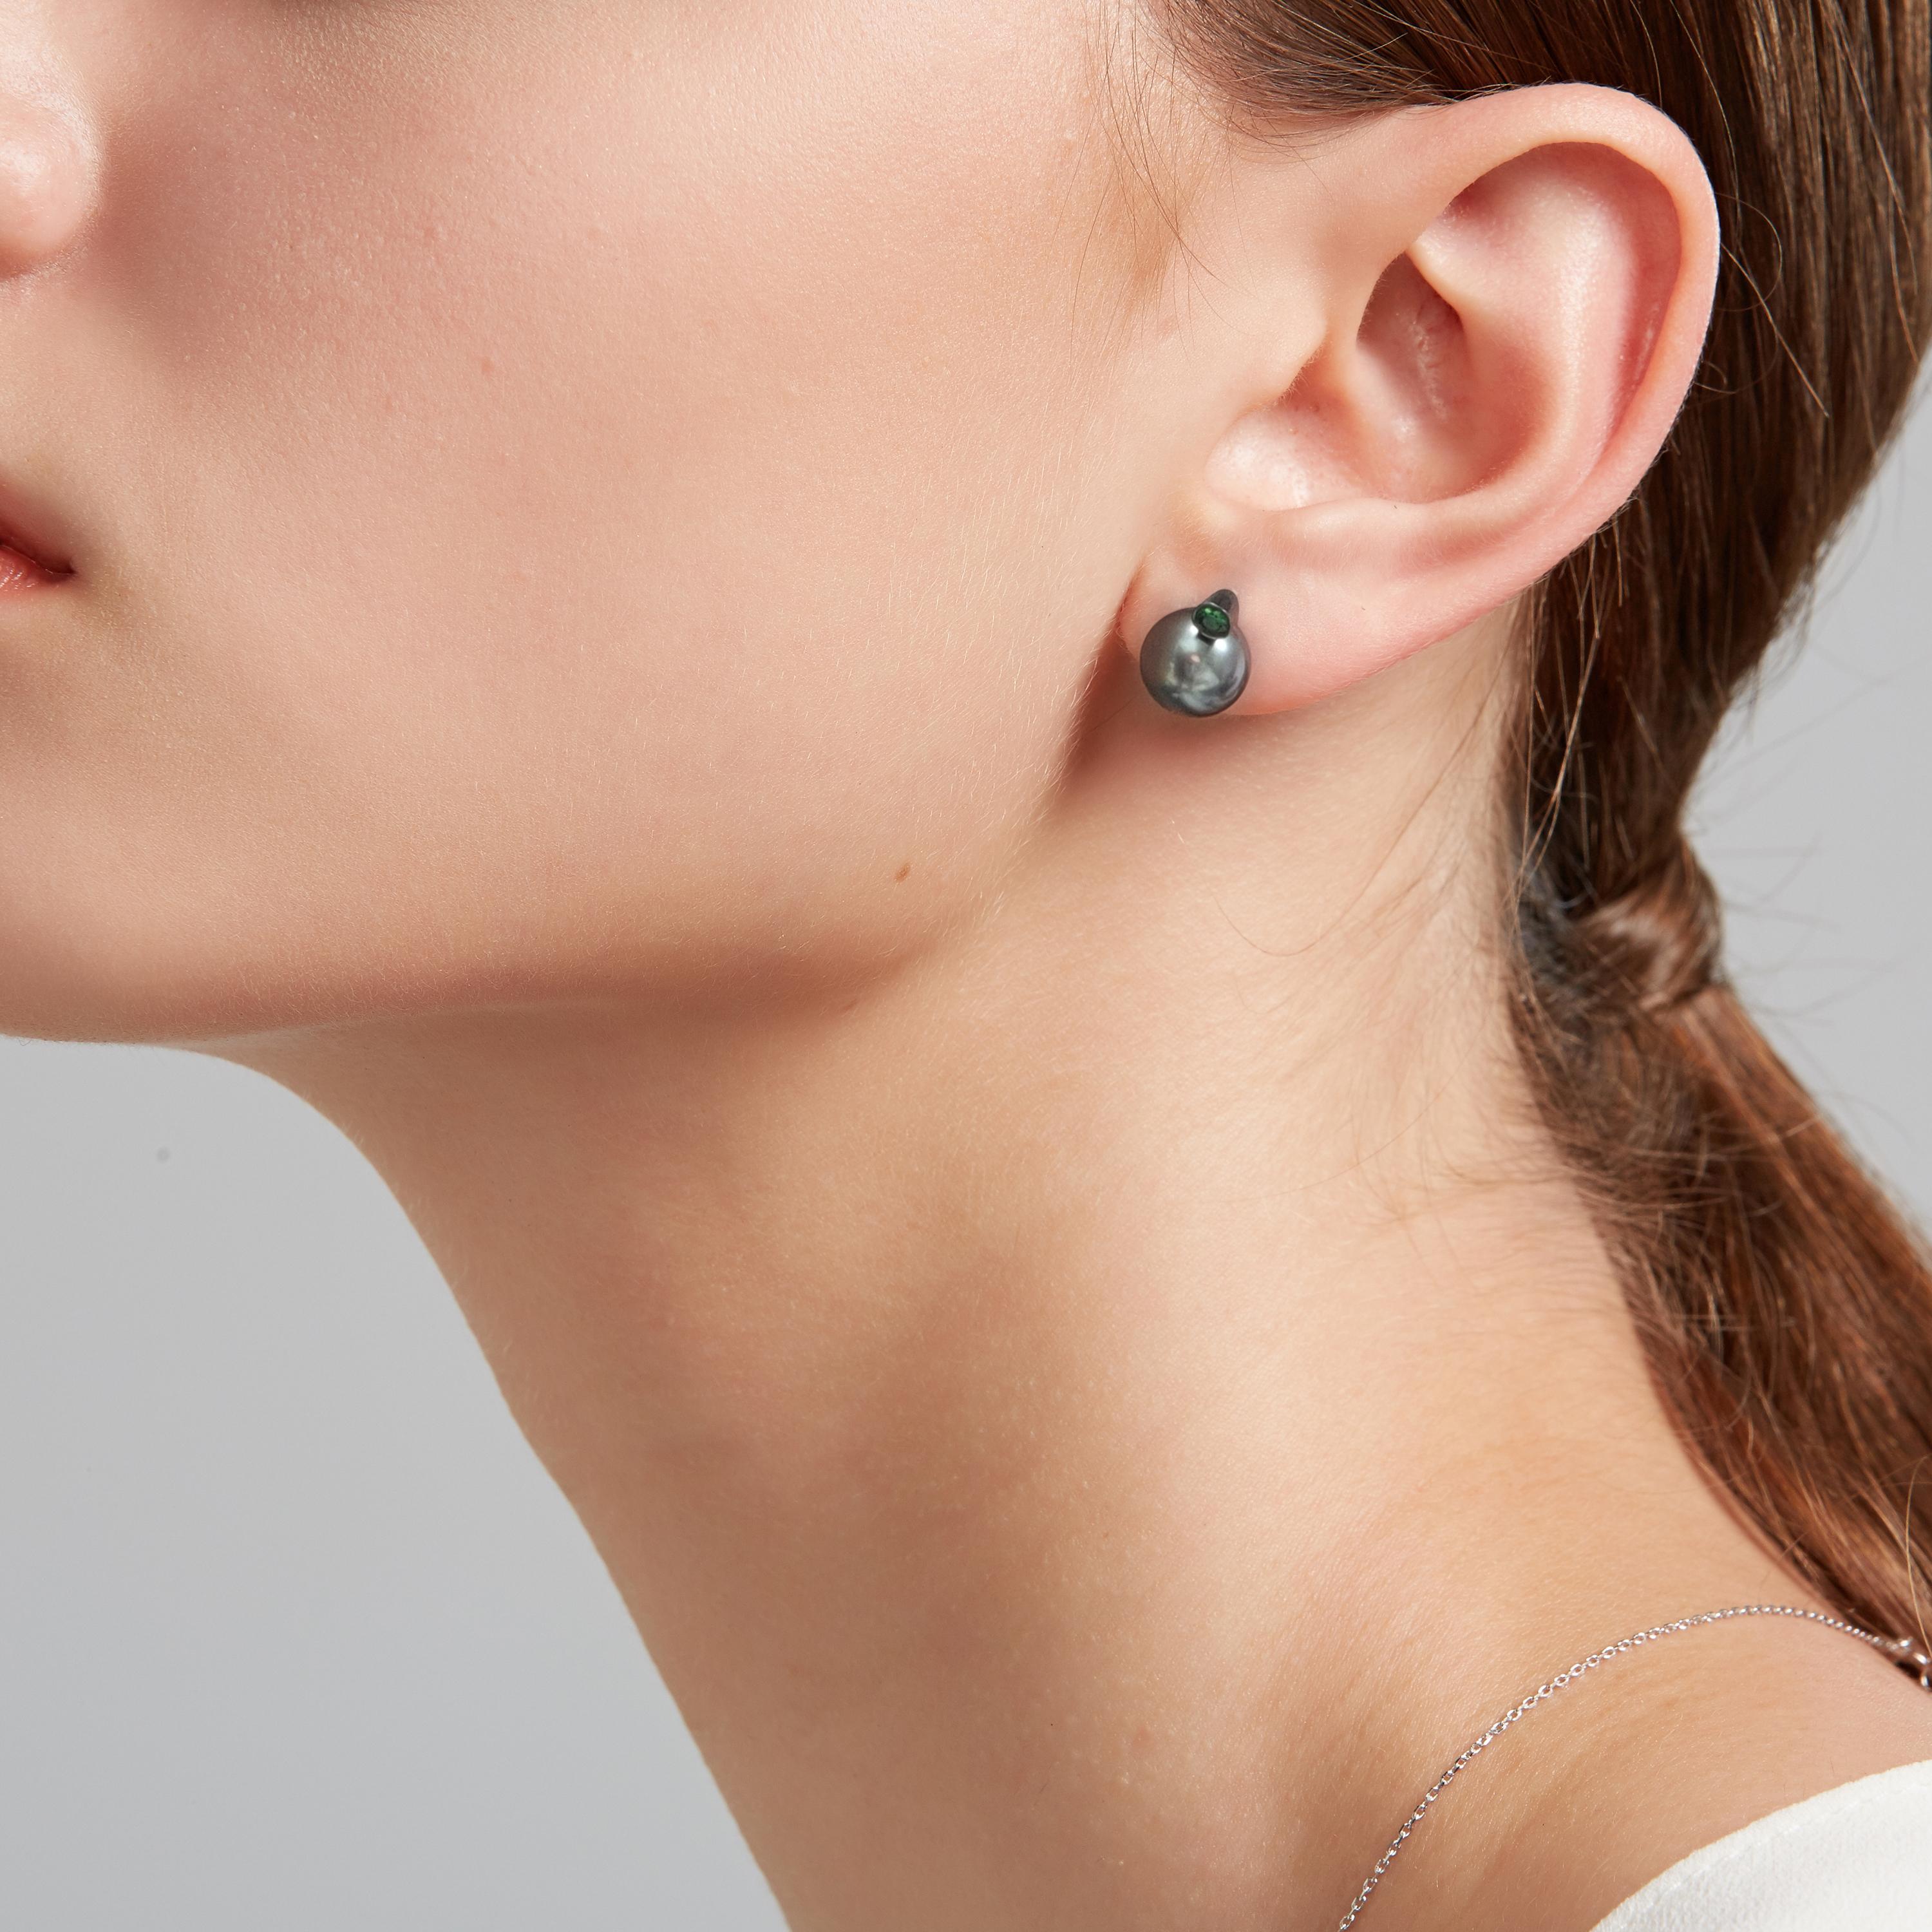 The Fei Liu 'Dawn' collection is a Kayman Award winning collection. These Dawn stud earrings capture the beautiful textural and colour of the deep ocean wonders. Featuring 0.04ct emerald hued green garnets and 9mm Tahitian black pearls, set in